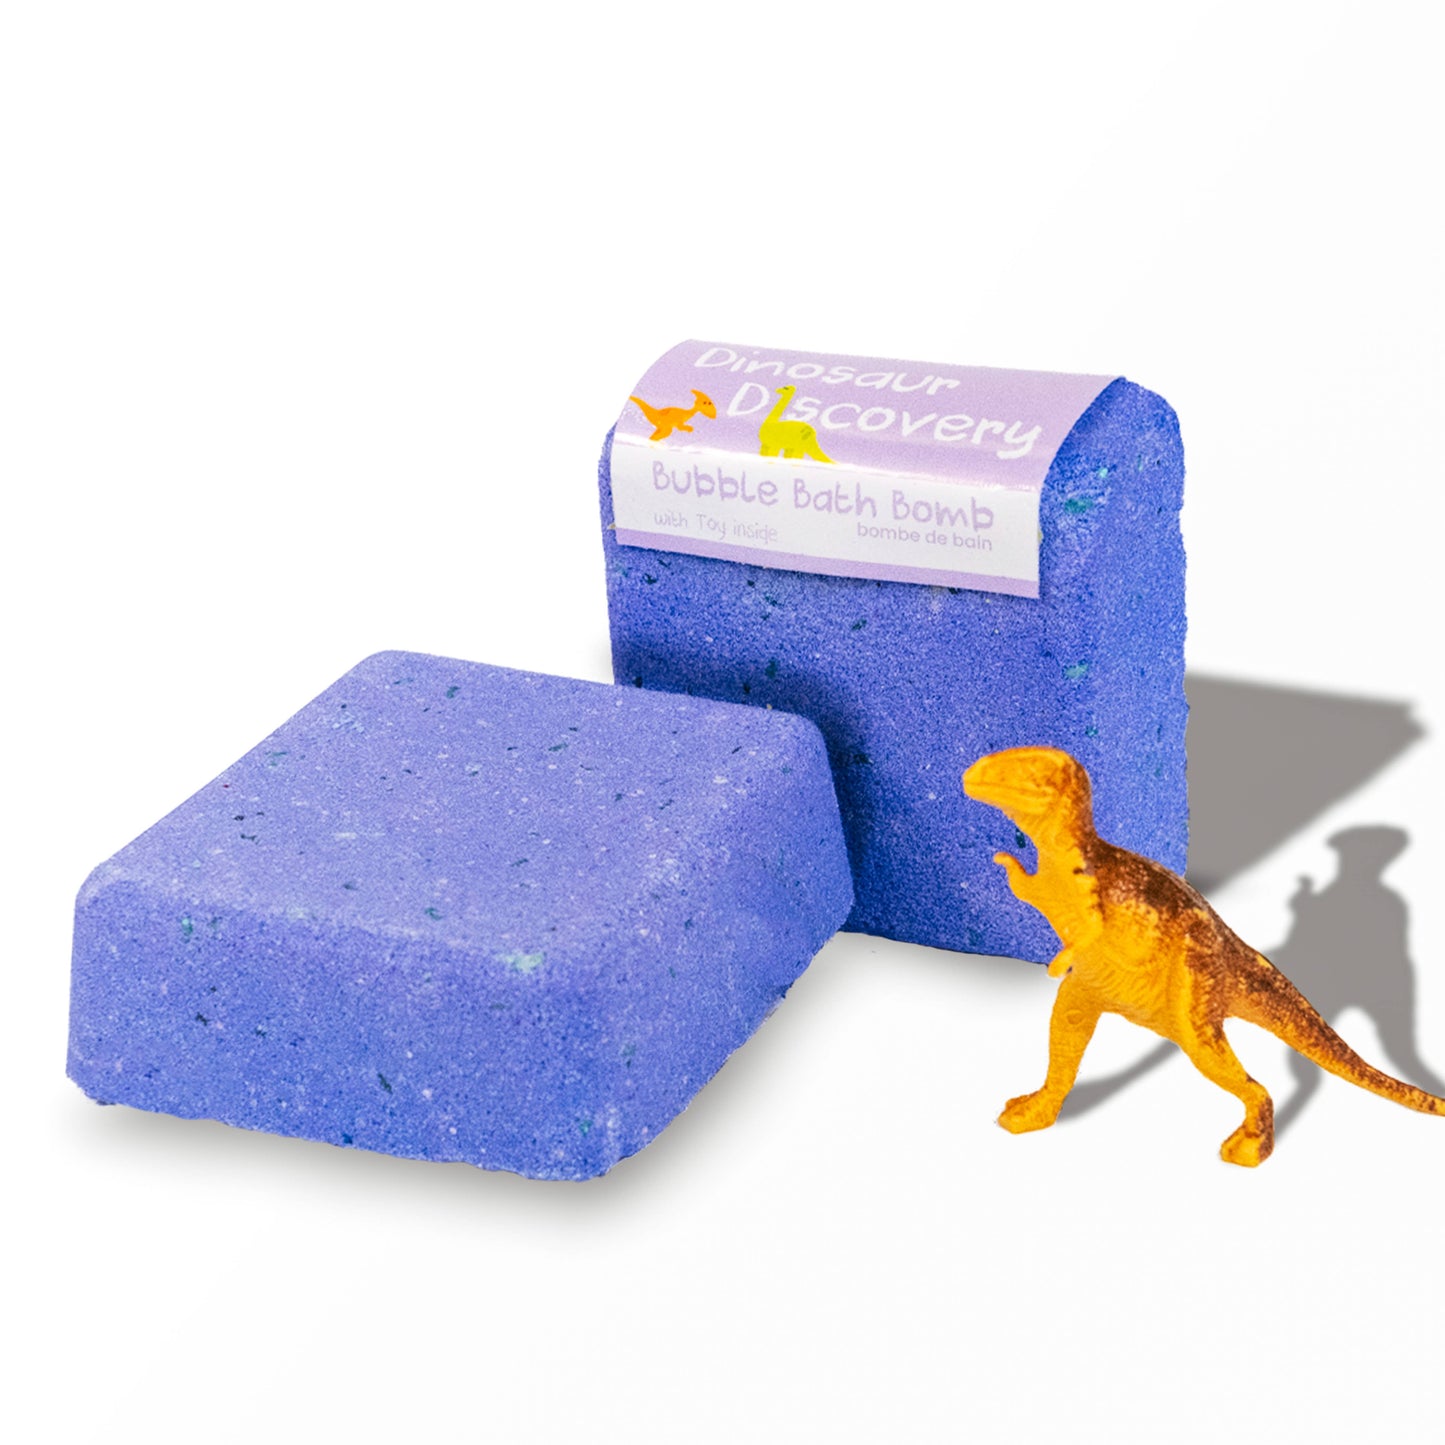 Dinosaur Discovery - Bath Bomb with surprise